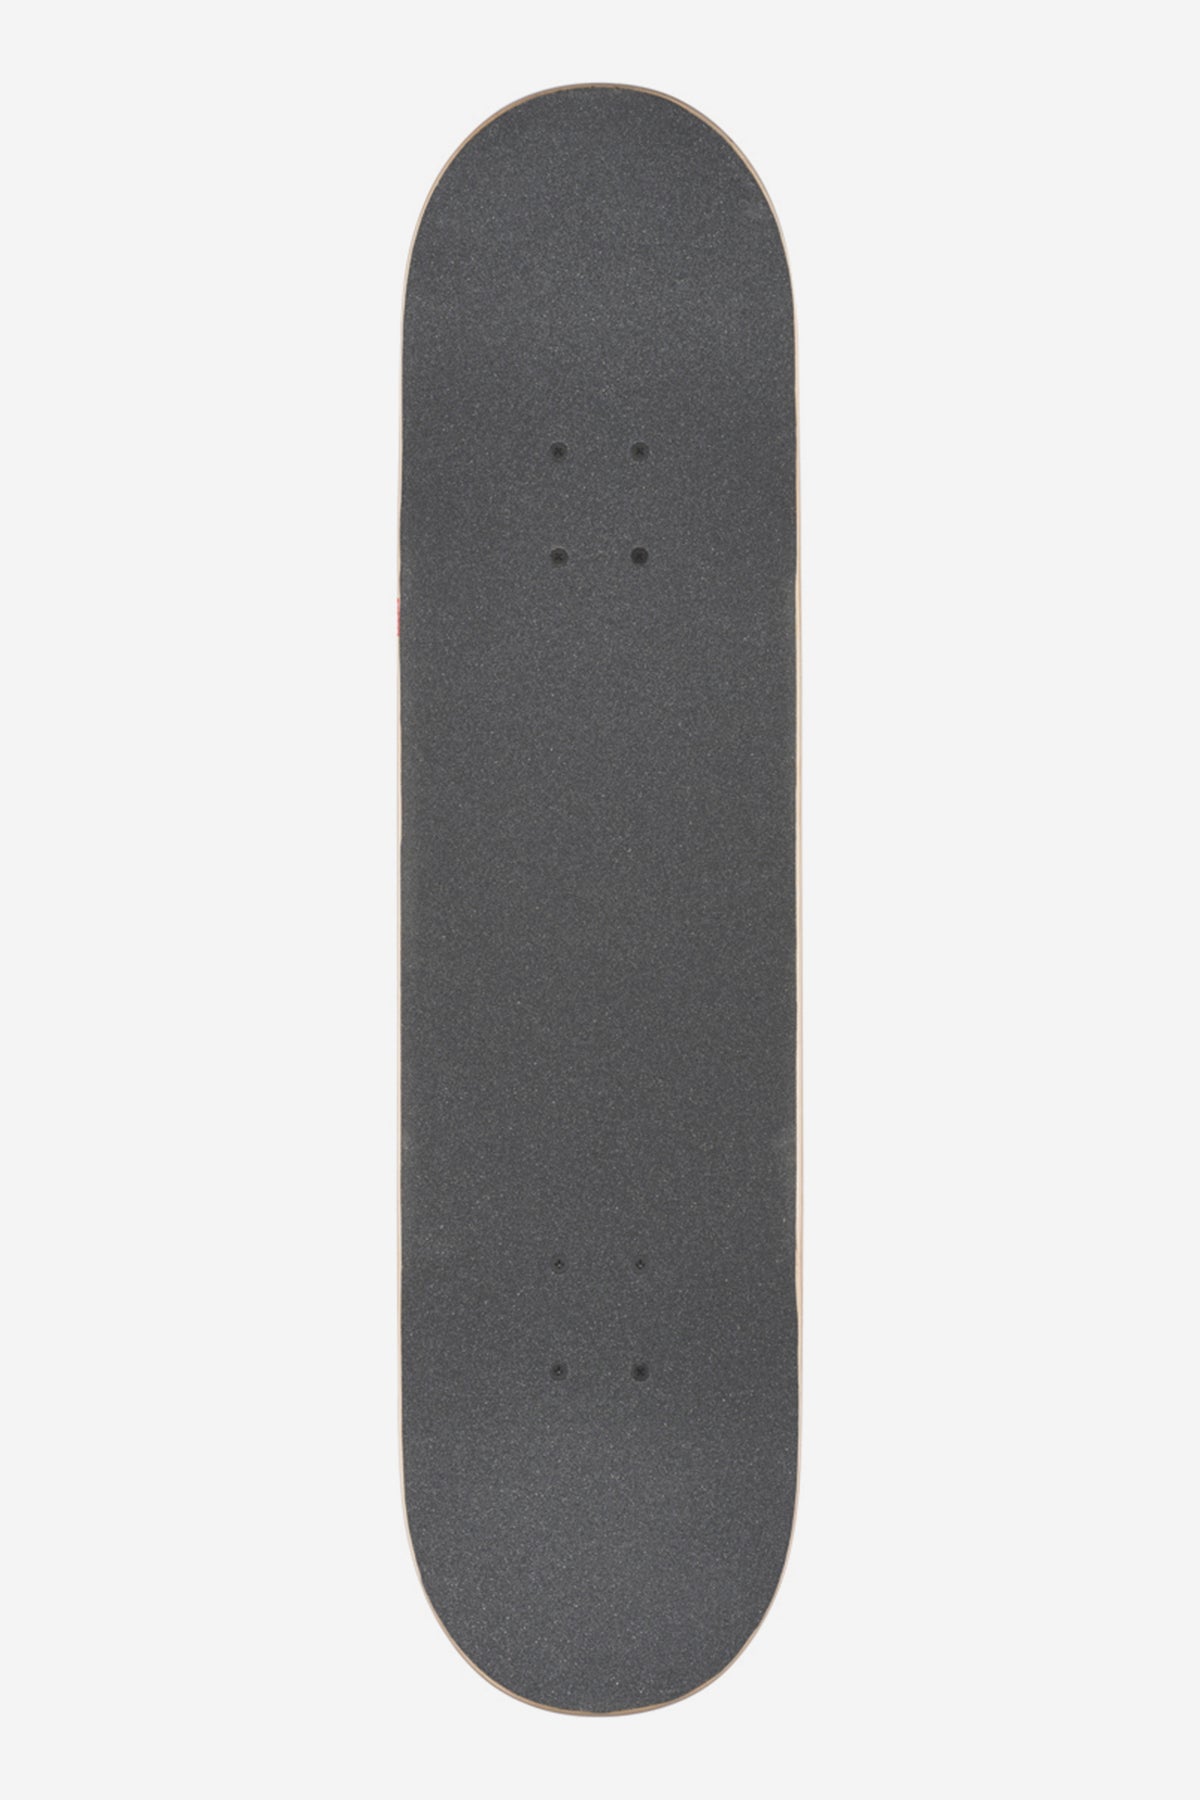 grip tape of Goodstock 7.75" Complete - Red